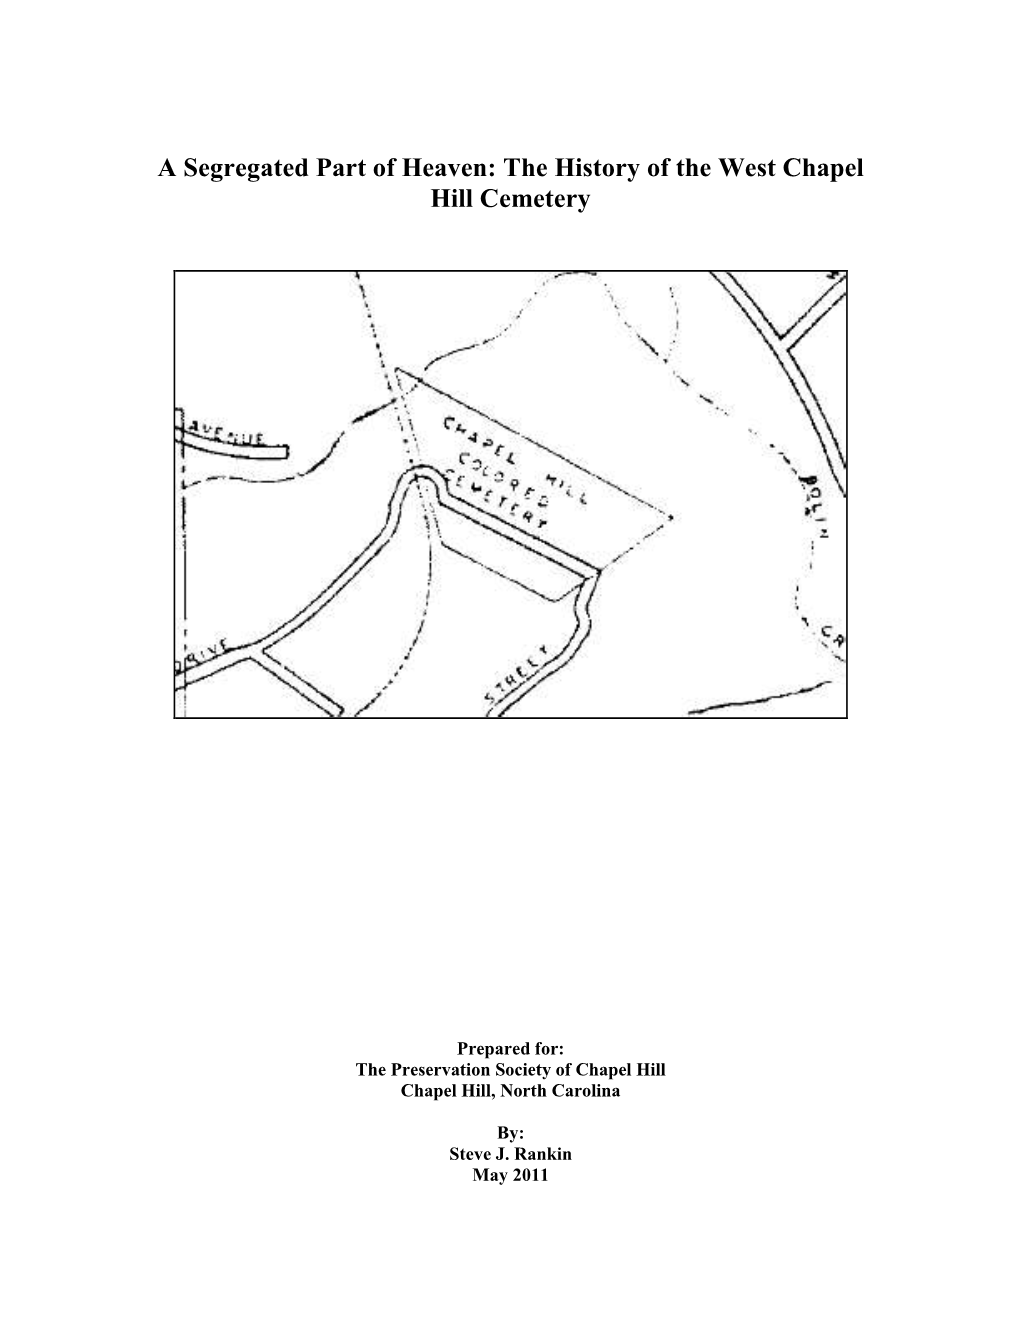 The History of the West Chapel Hill Cemetery